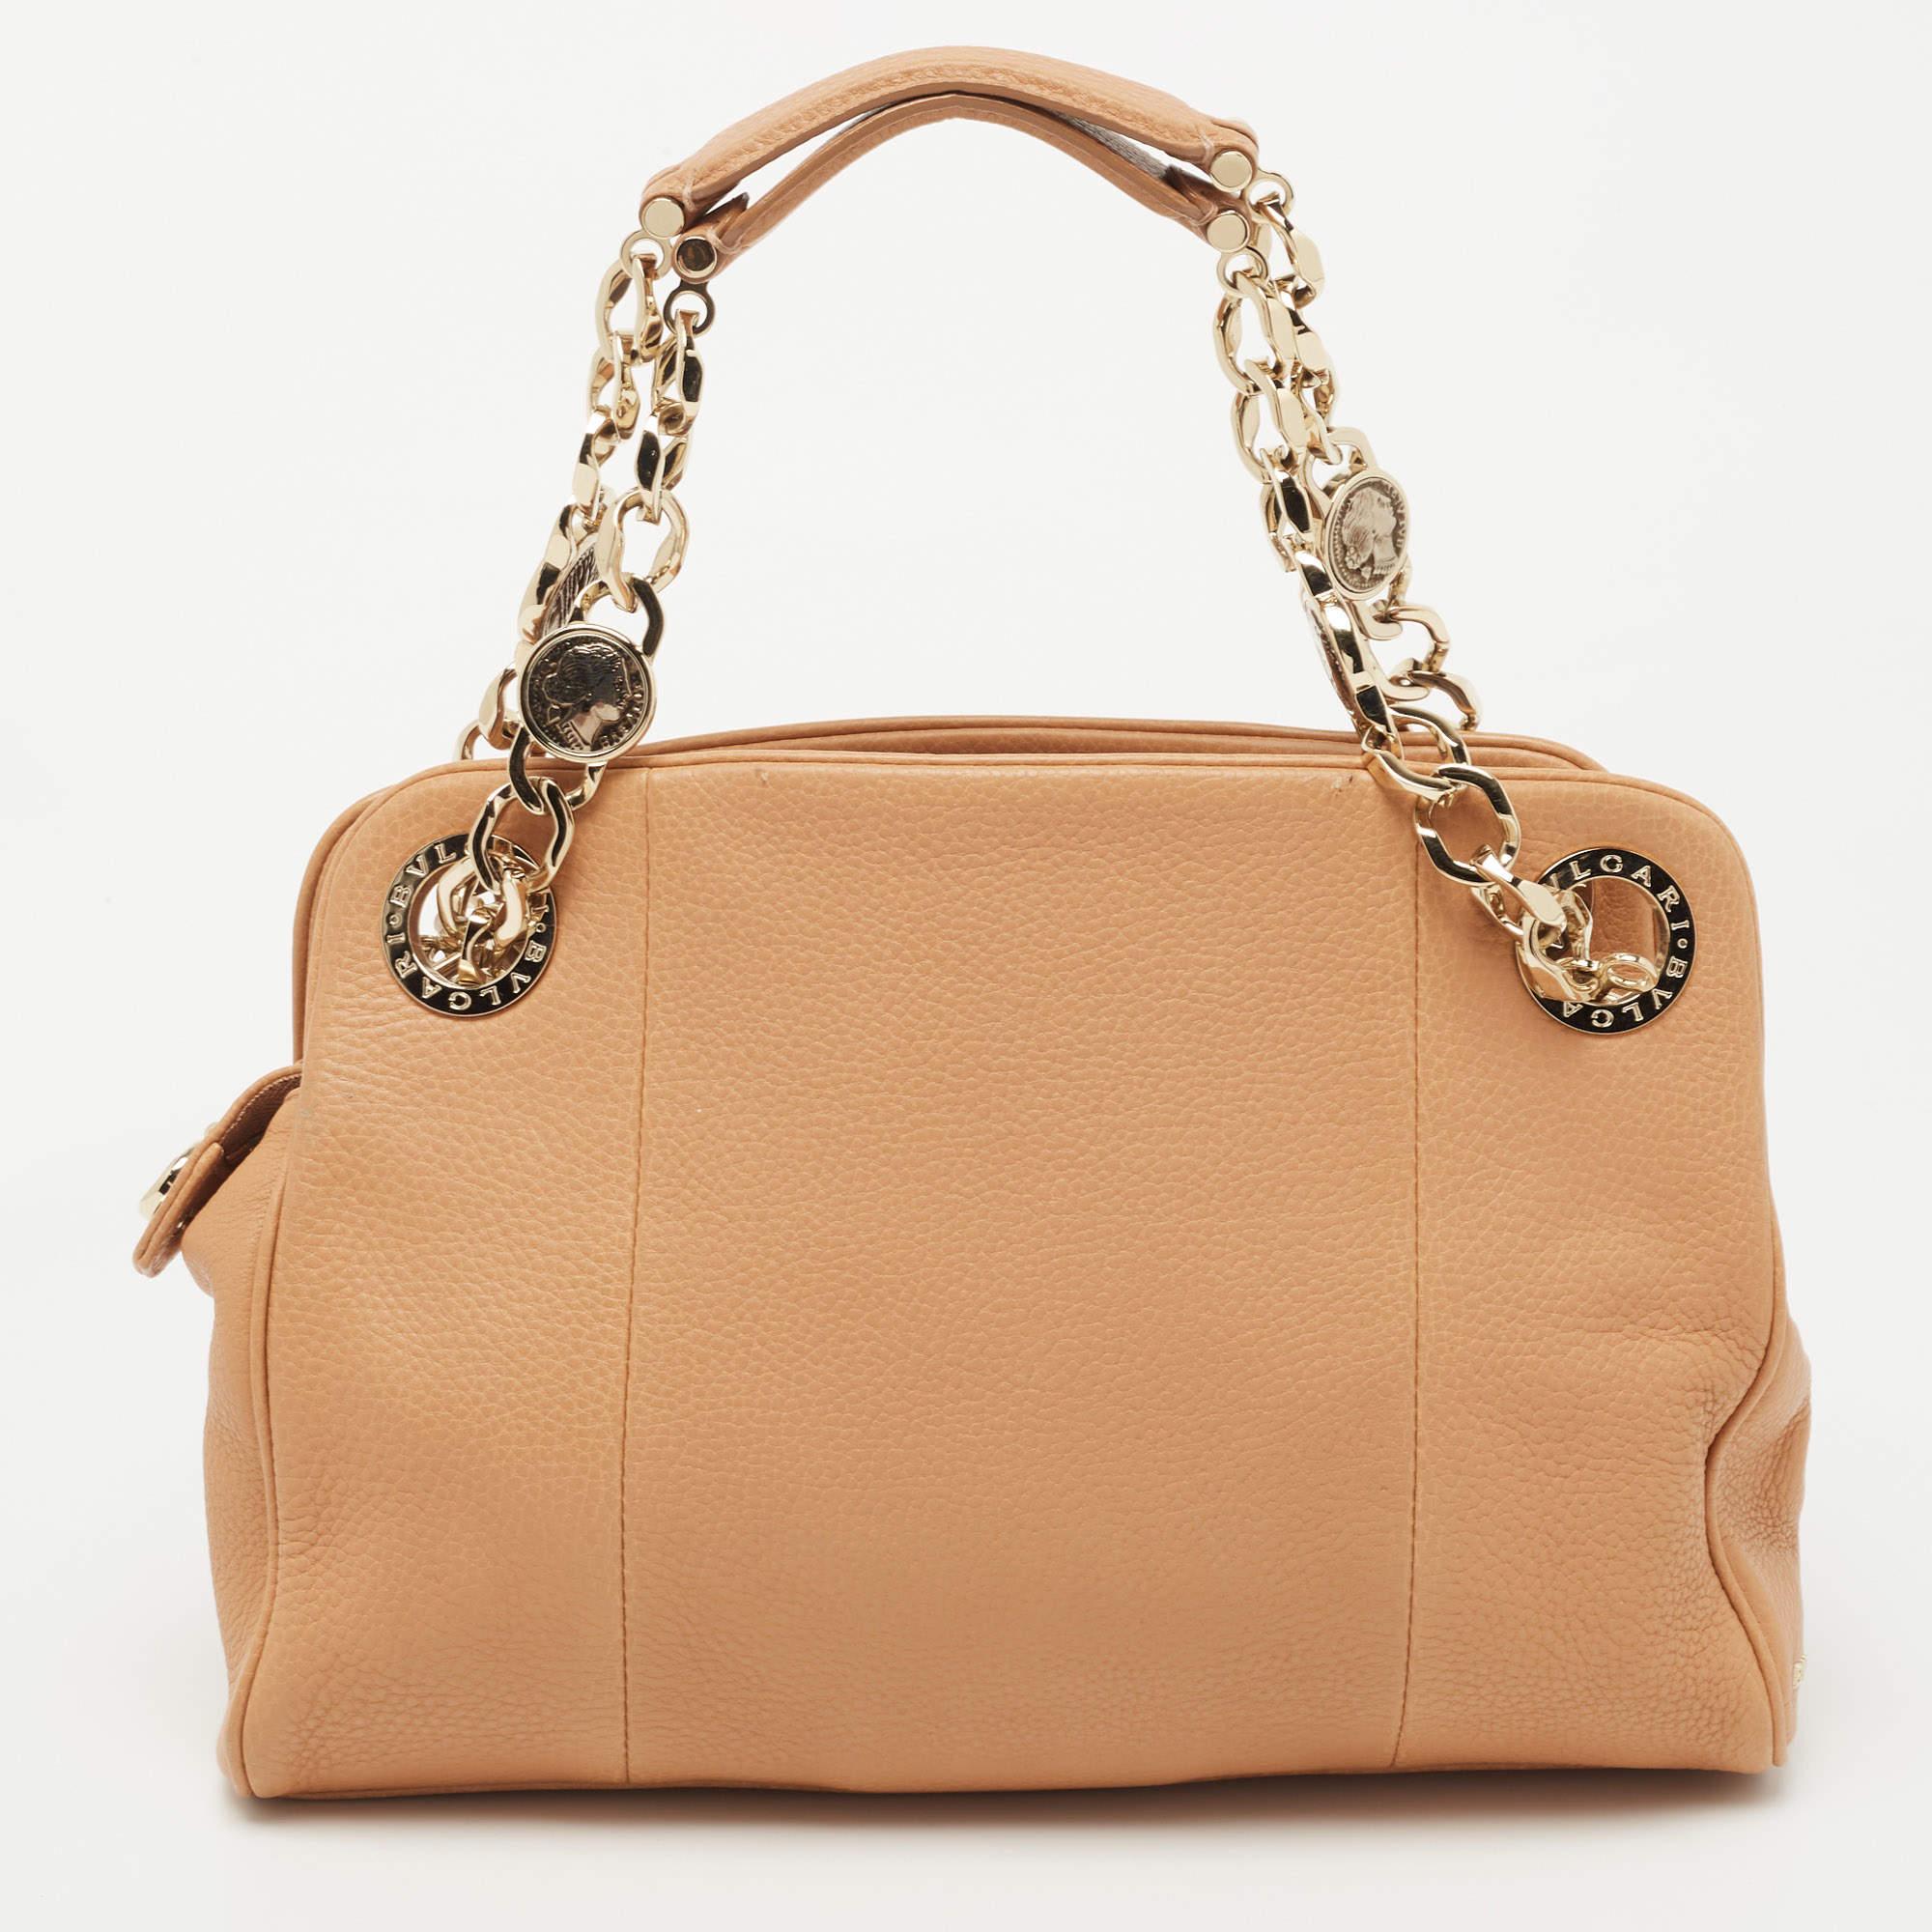 Handbags are more than just instruments to carry one's essentials. They essay our sense of style, and the better the bag, the more confidence we get when we hold it. Crafted from leather, this Bvlgari bag is stylish and functional. It carries a